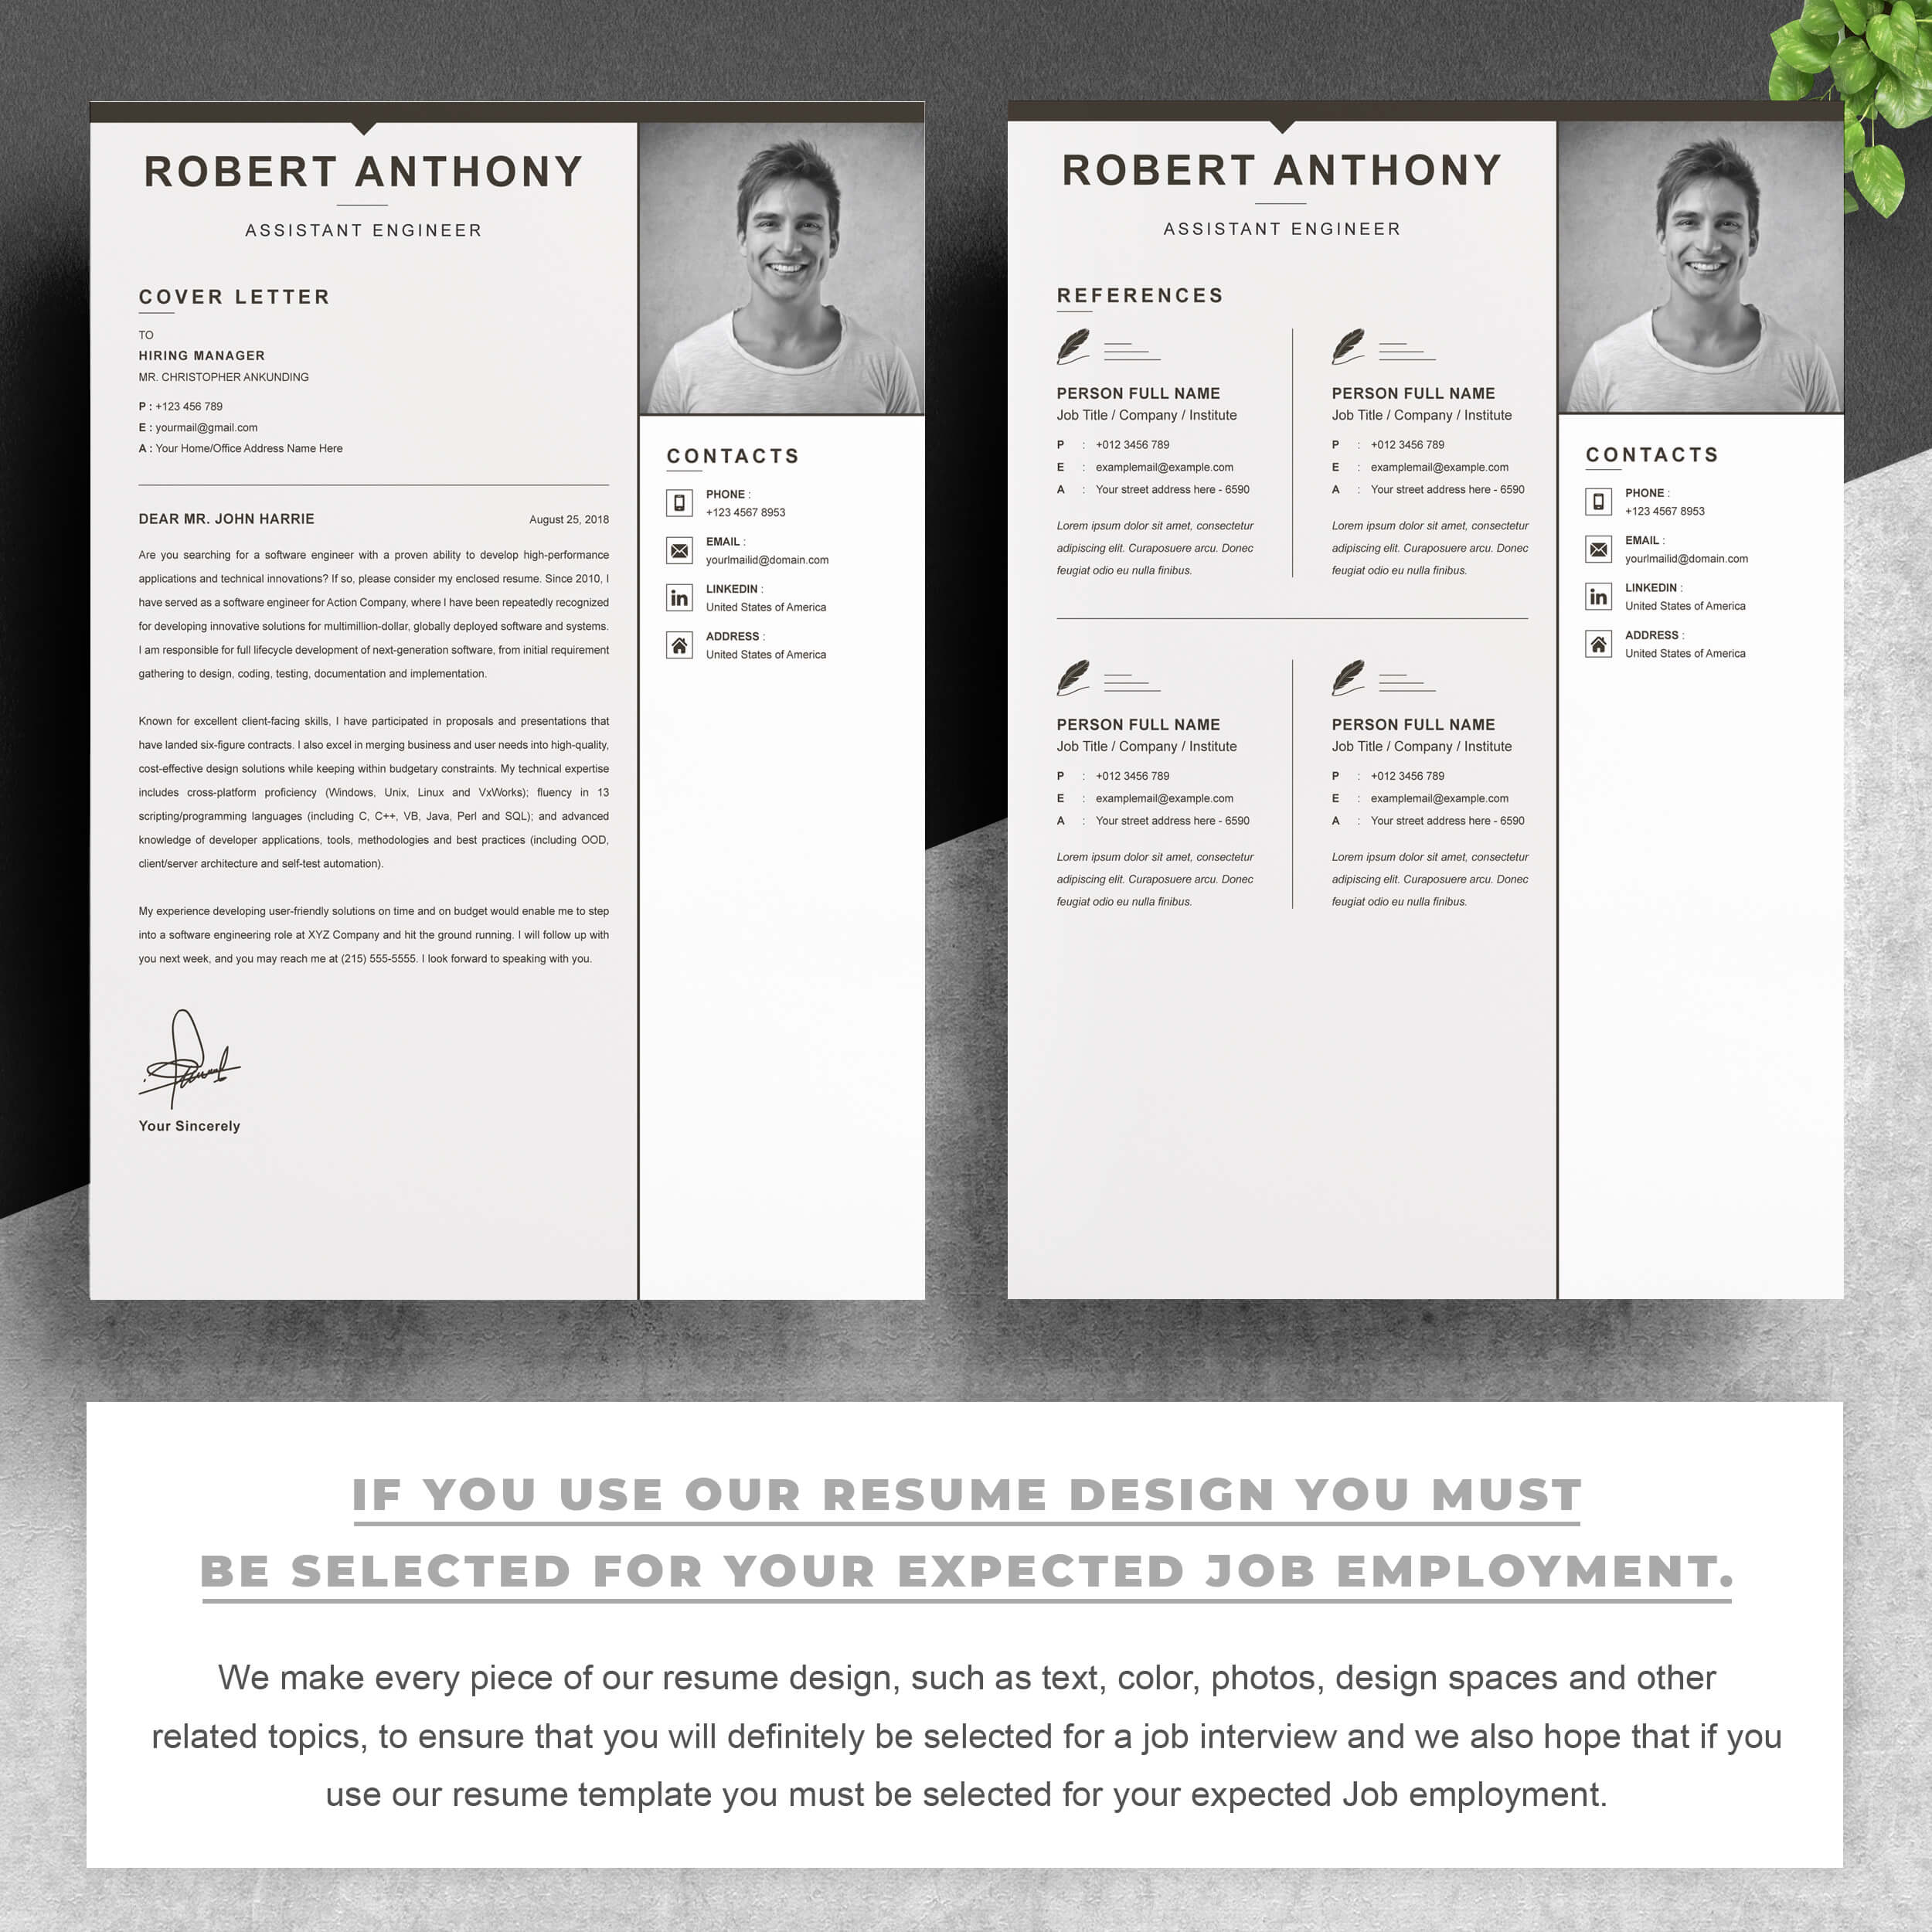 03 2 pages free resume design template copy 116